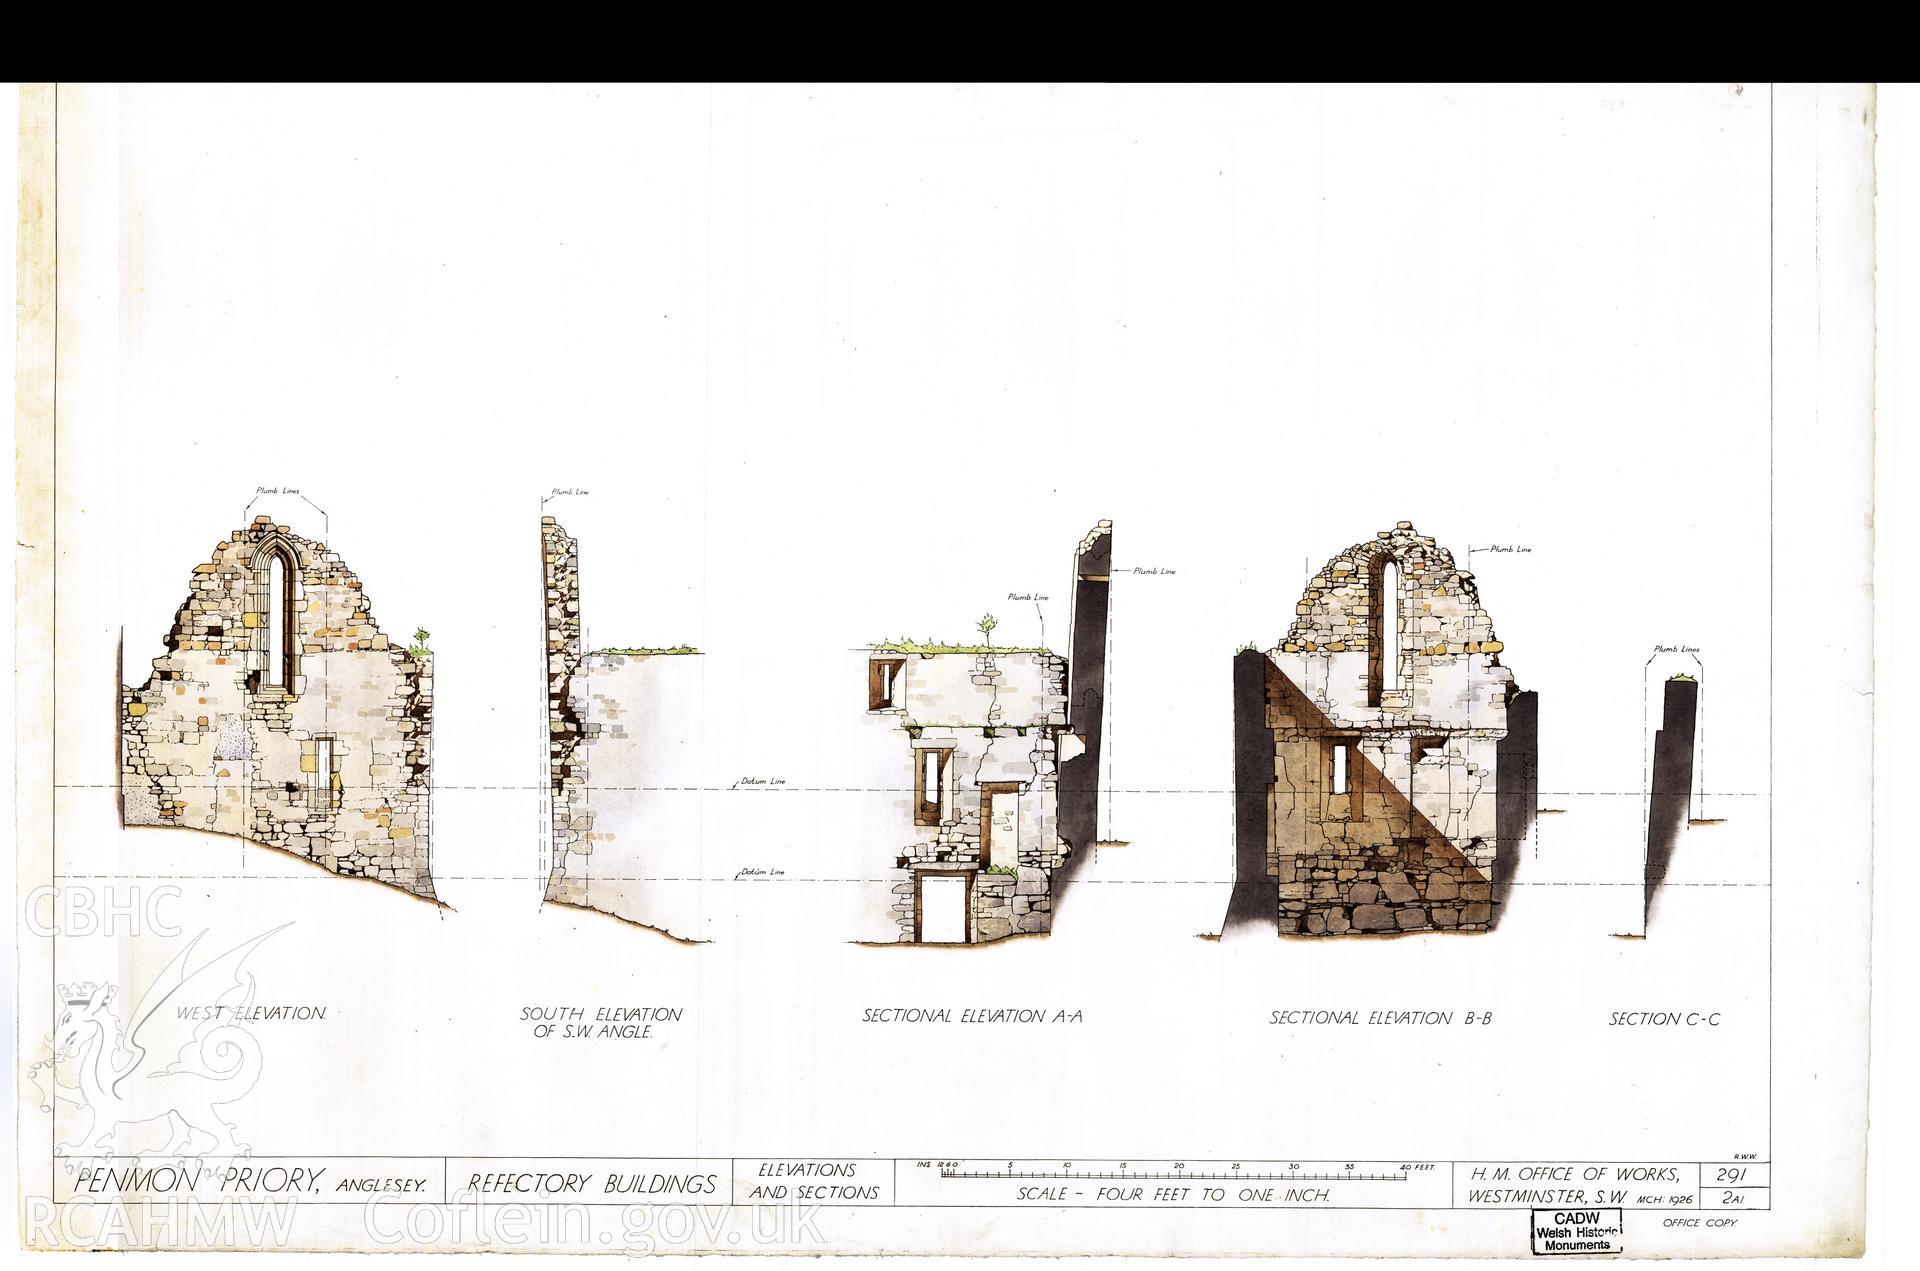 Cadw guardianship monument drawing of Penmon Priory. Refectory, elevations & sections. Cadw Ref. No:291/2a1. Scale 1:48.